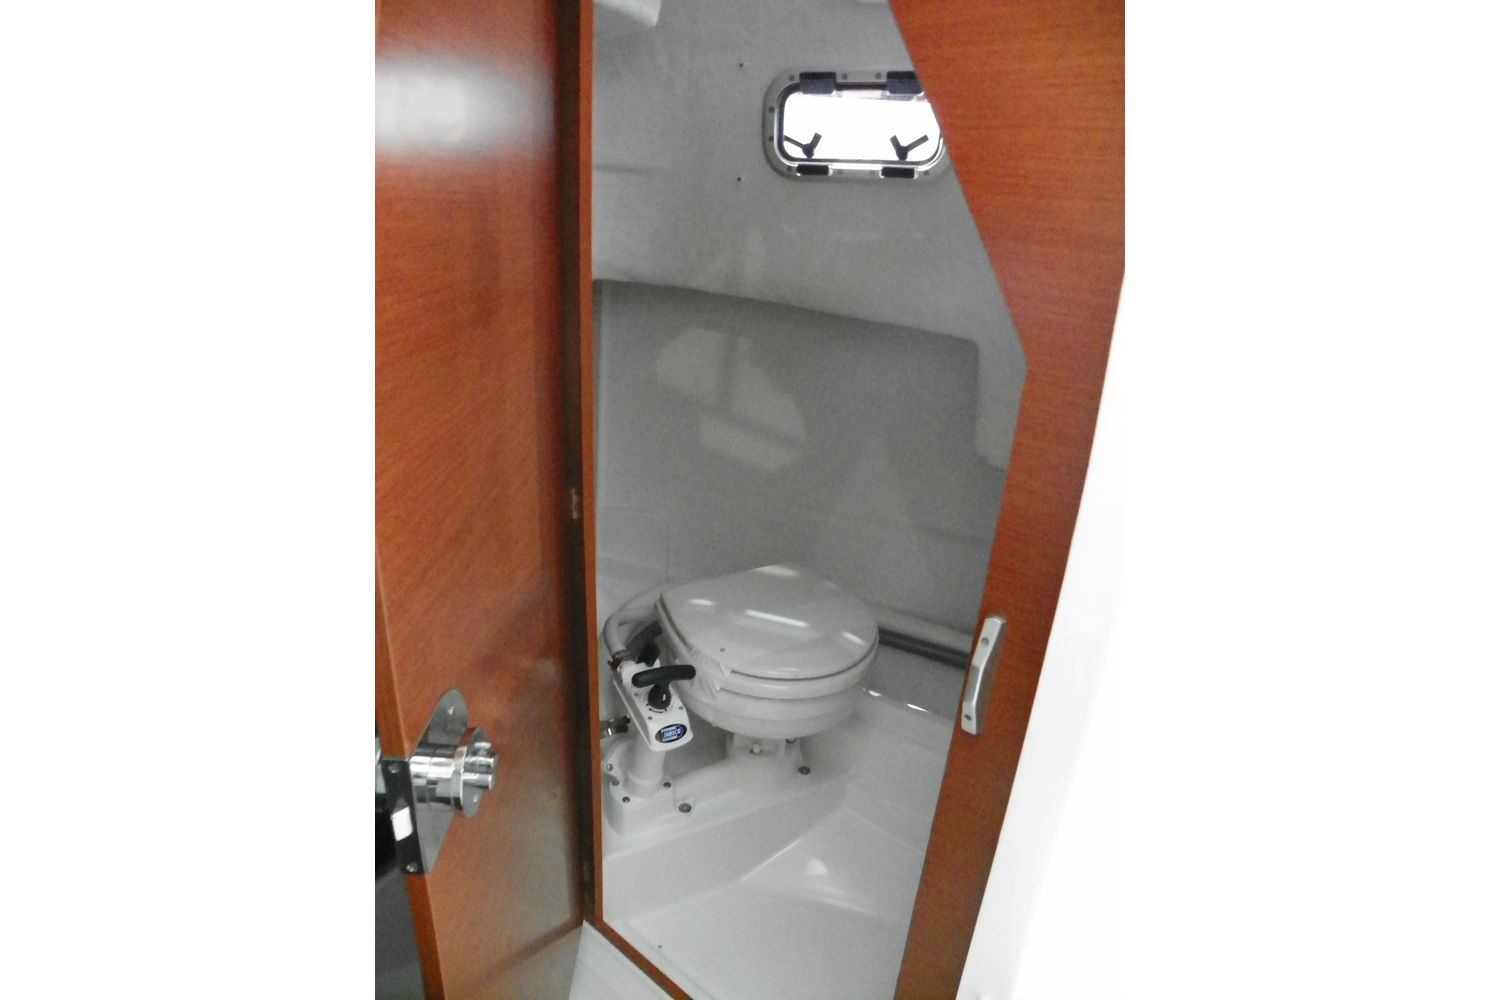 Jeanneau Merry Fisher 695 - marine toilet compartment